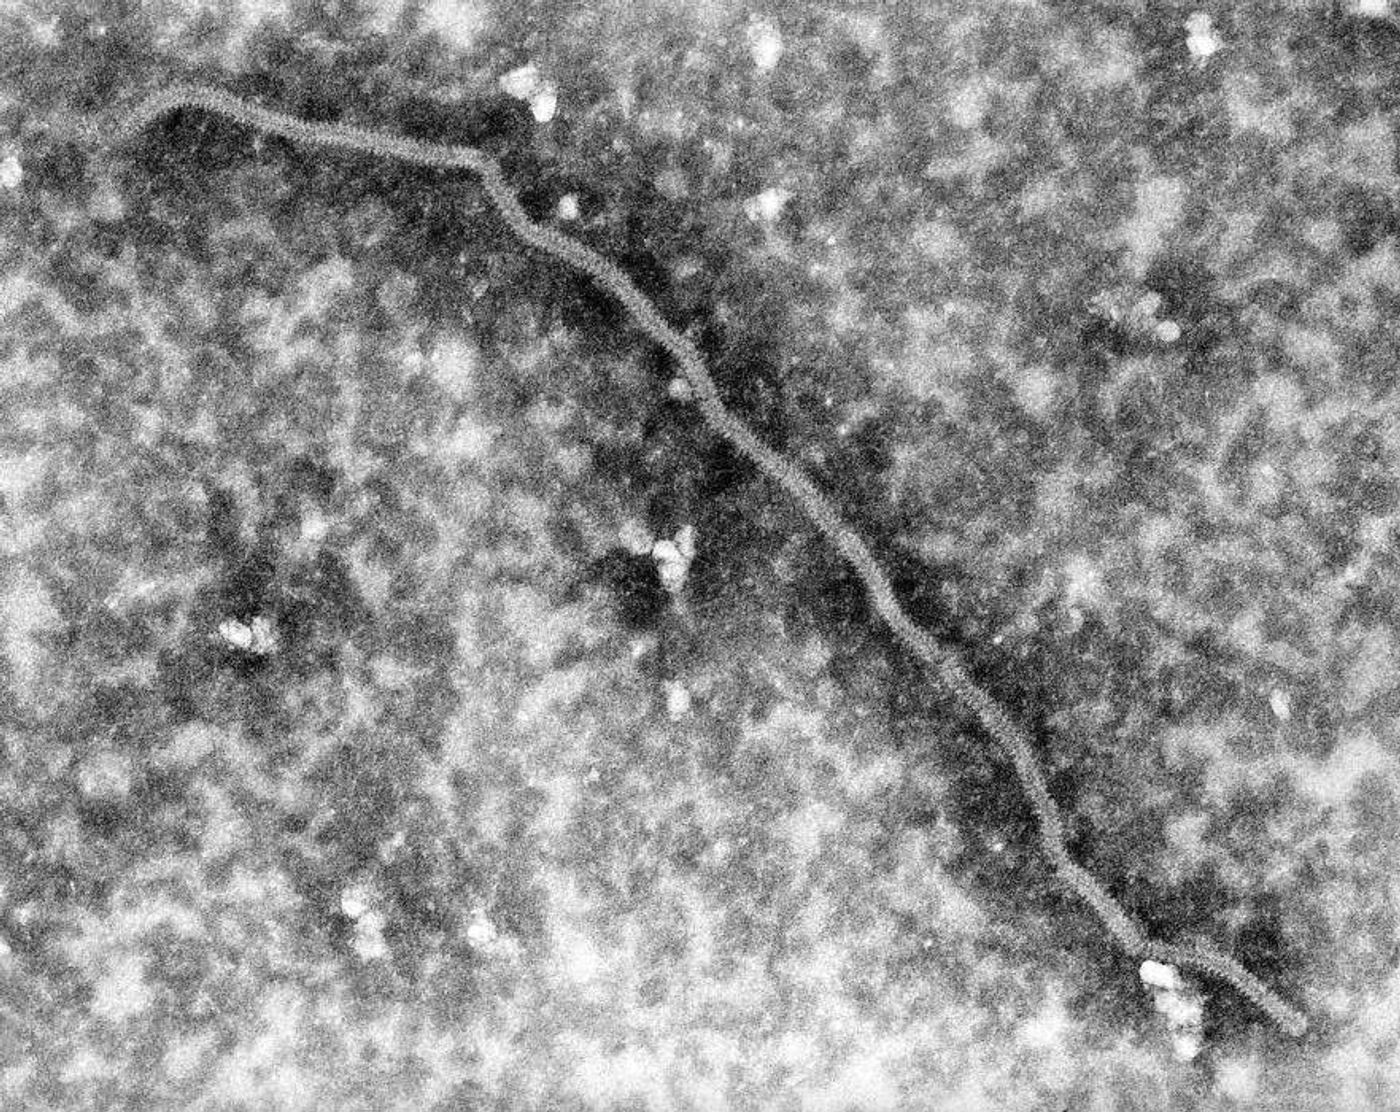 Under a highly magnified view of 168,000x, this 1999 transmission electron micrographic shows a Nipah virus nucleocapsid / Credit: CDC/ C. S. Goldsmith; P. Rota